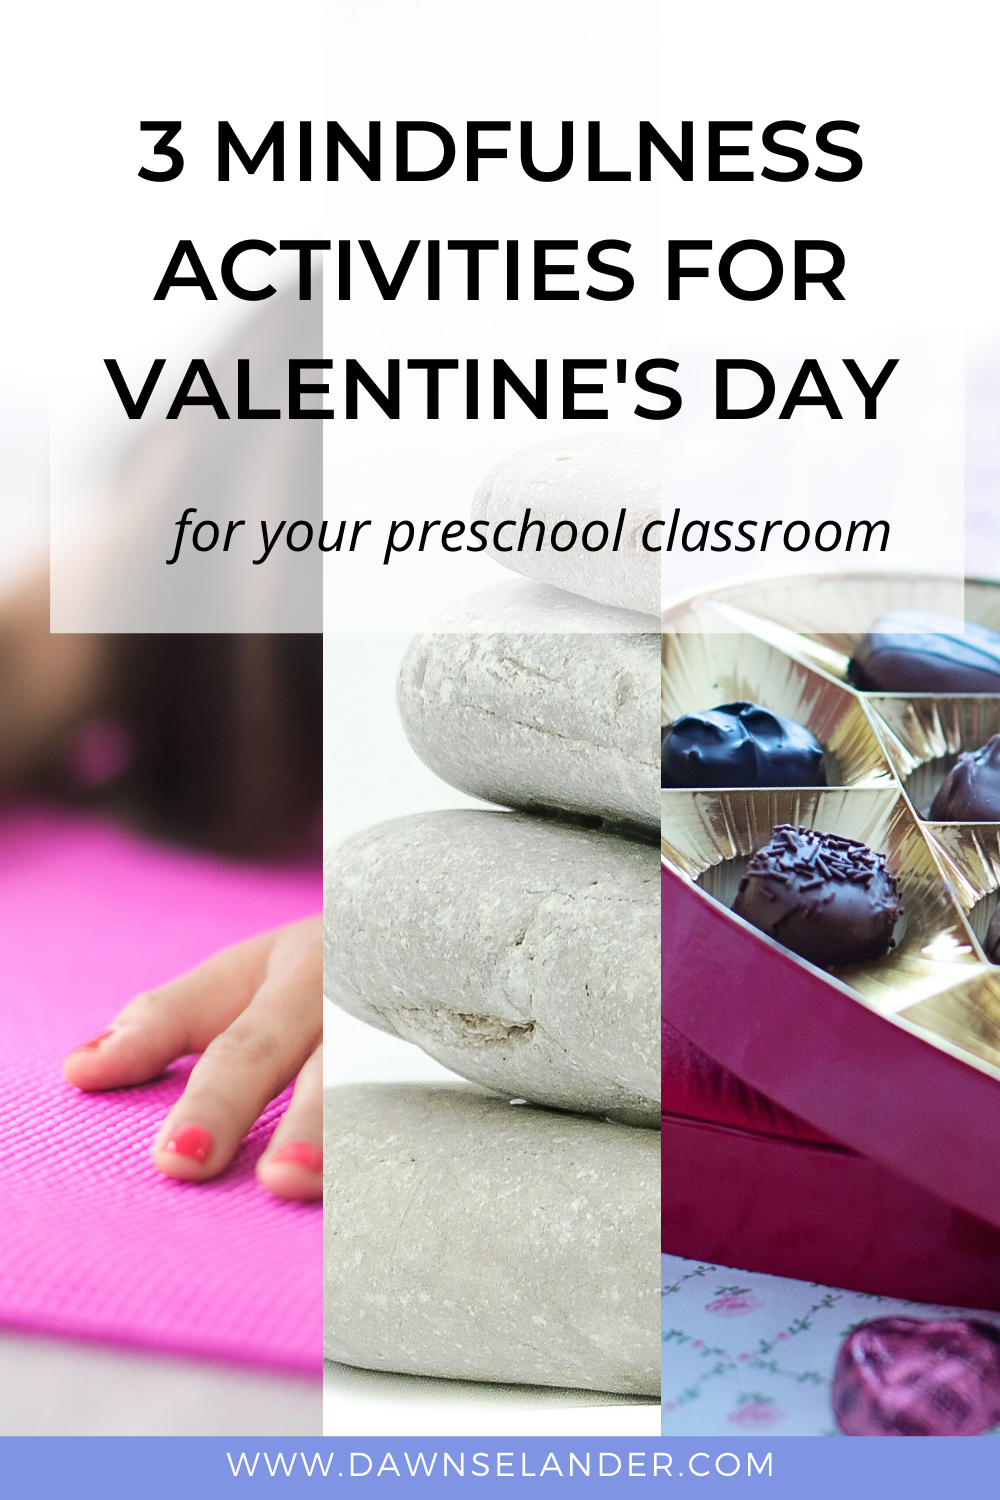 Three mindfulness activities for Valentine's Day for your preschool classroom.